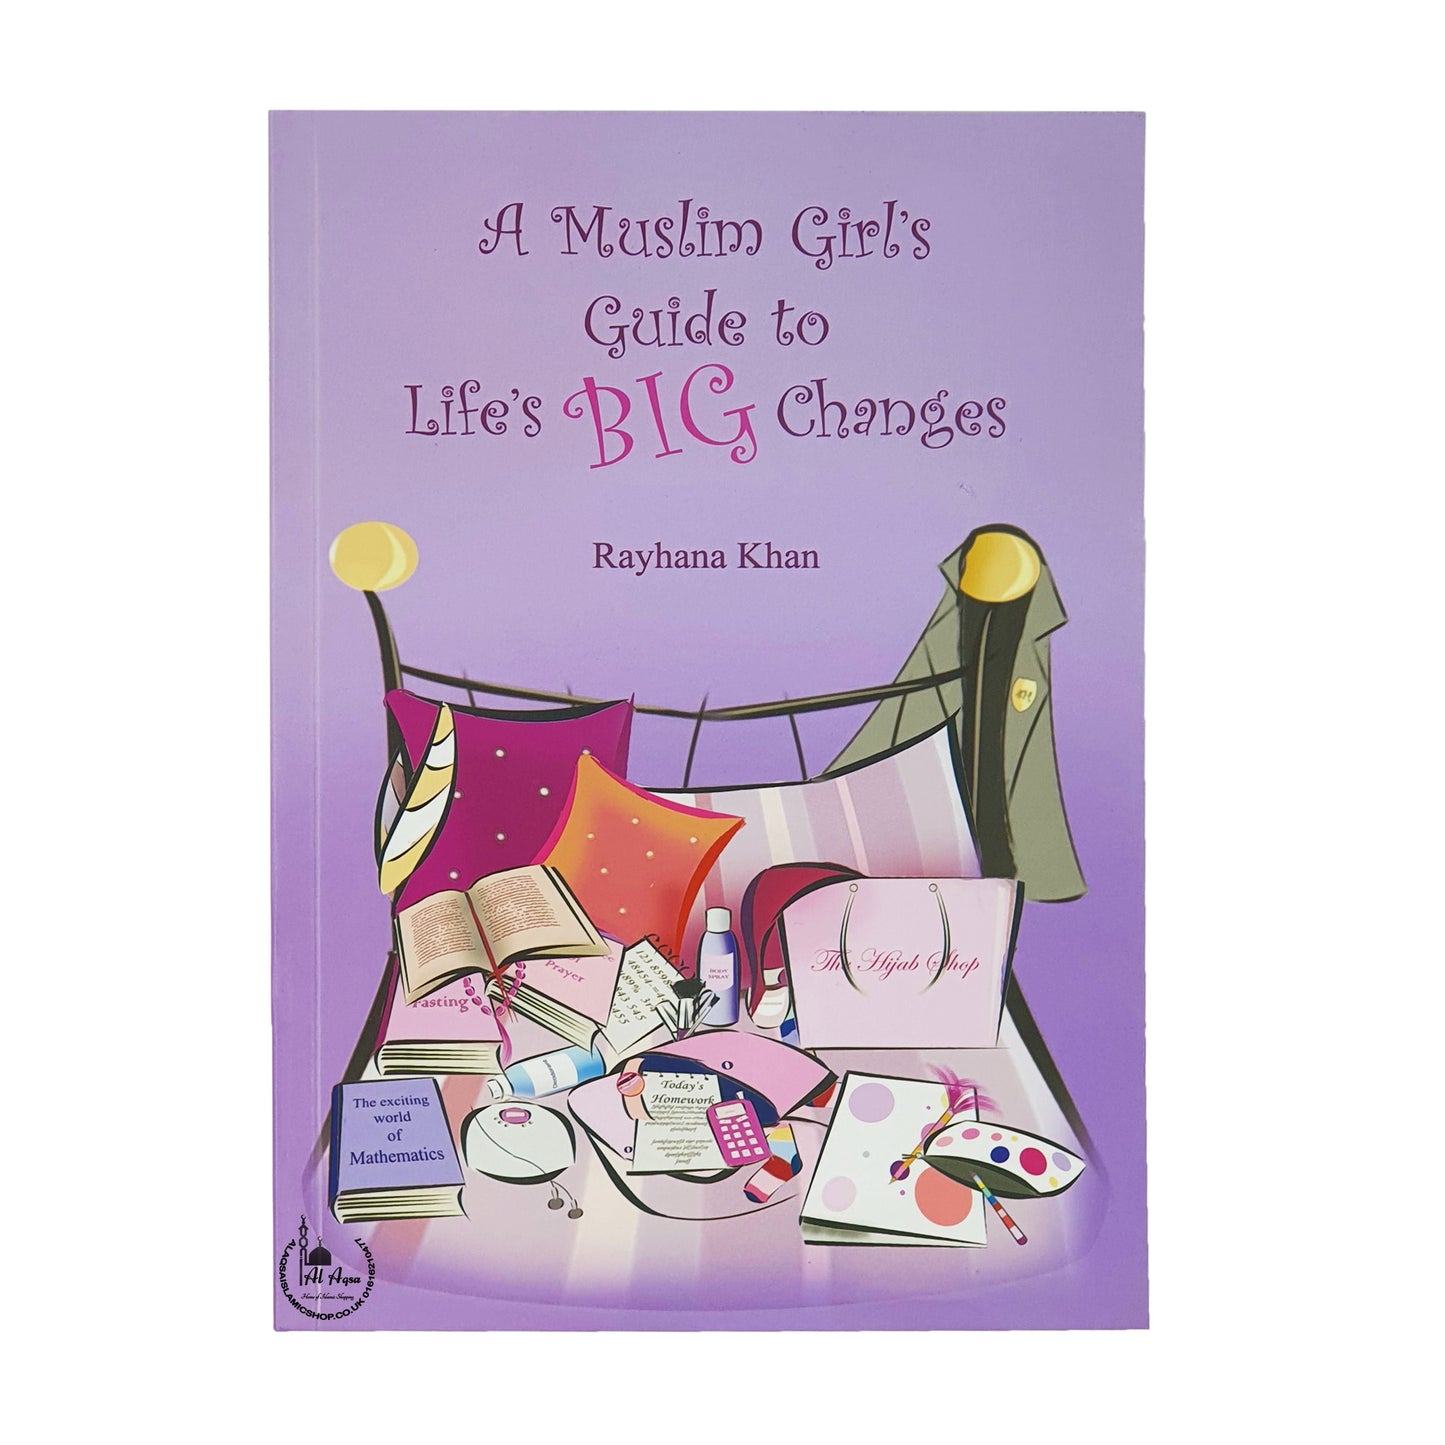 A Muslim Girls Guide to Lifes big changes